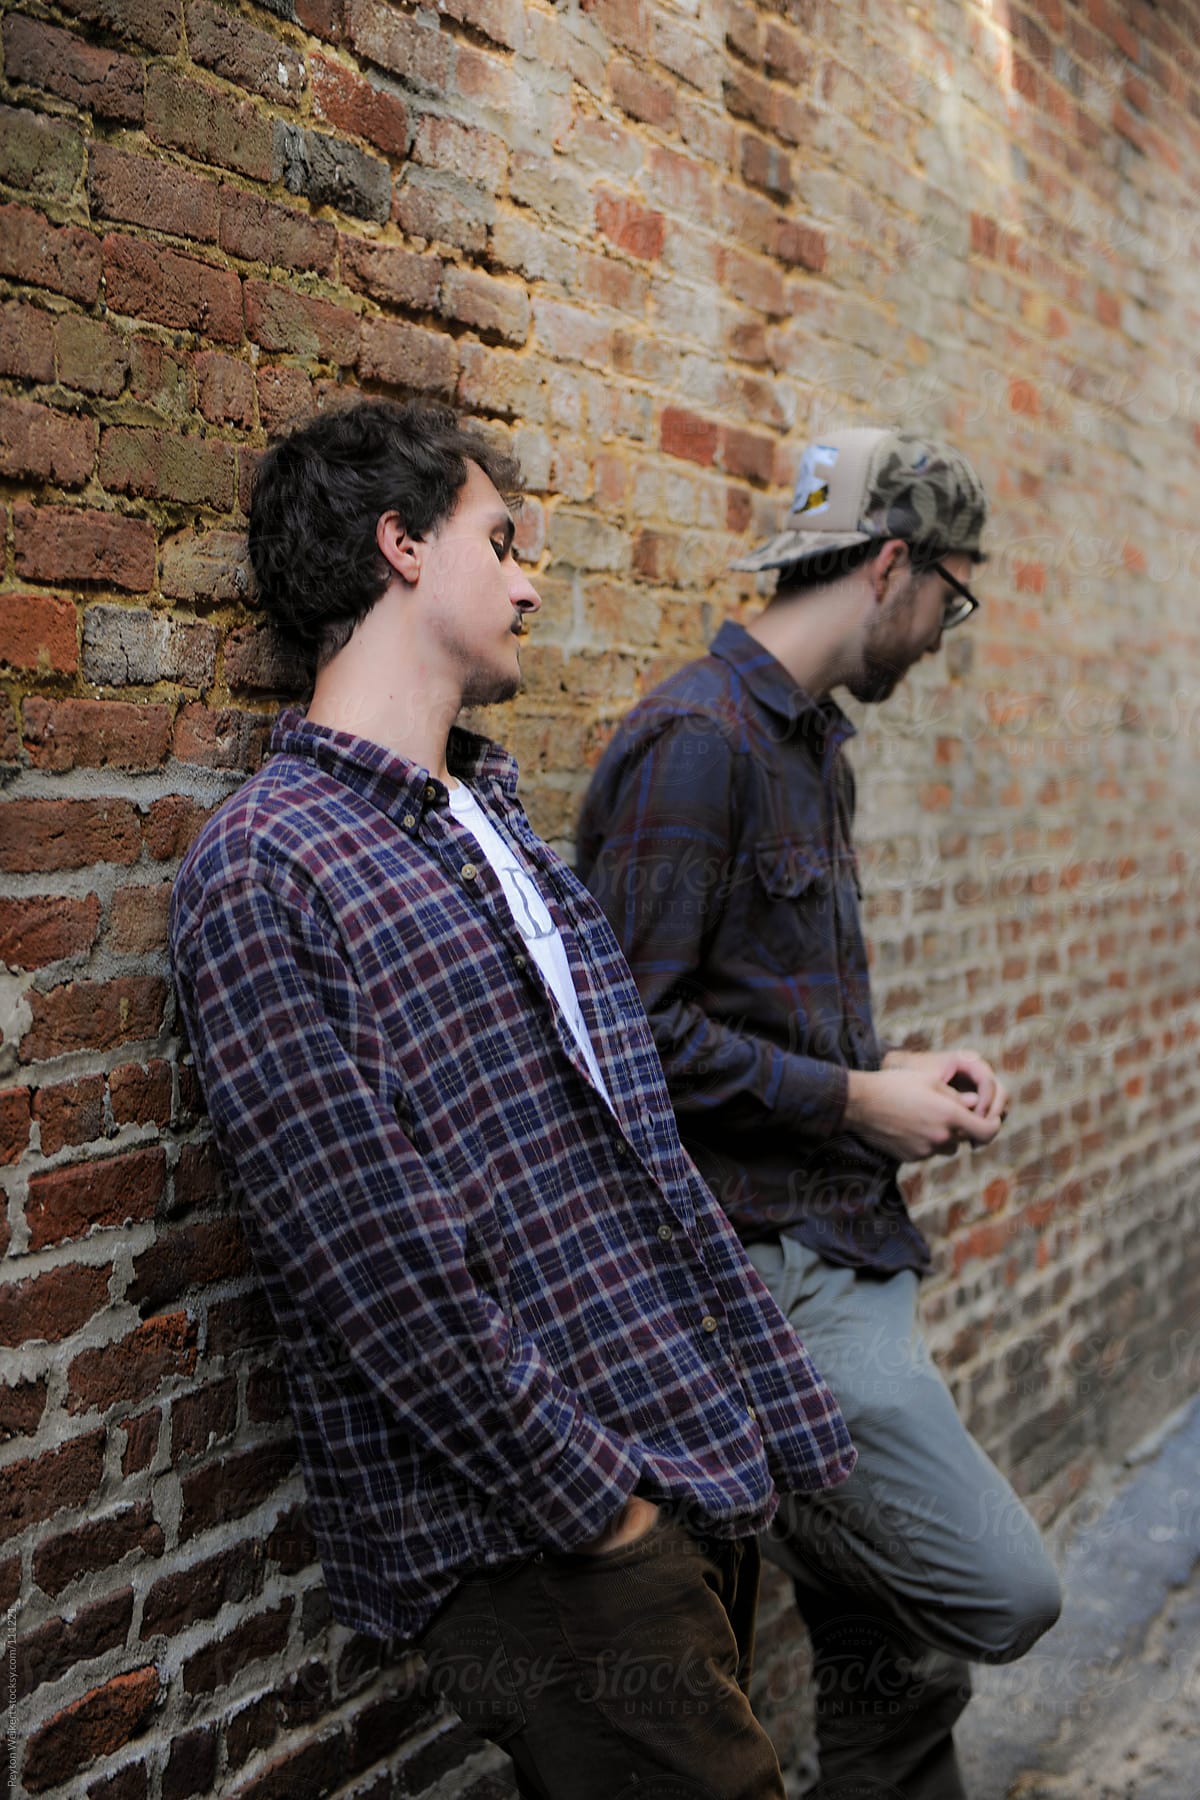 Hip young men hanging out and relaxing against a brick wall in an alley way